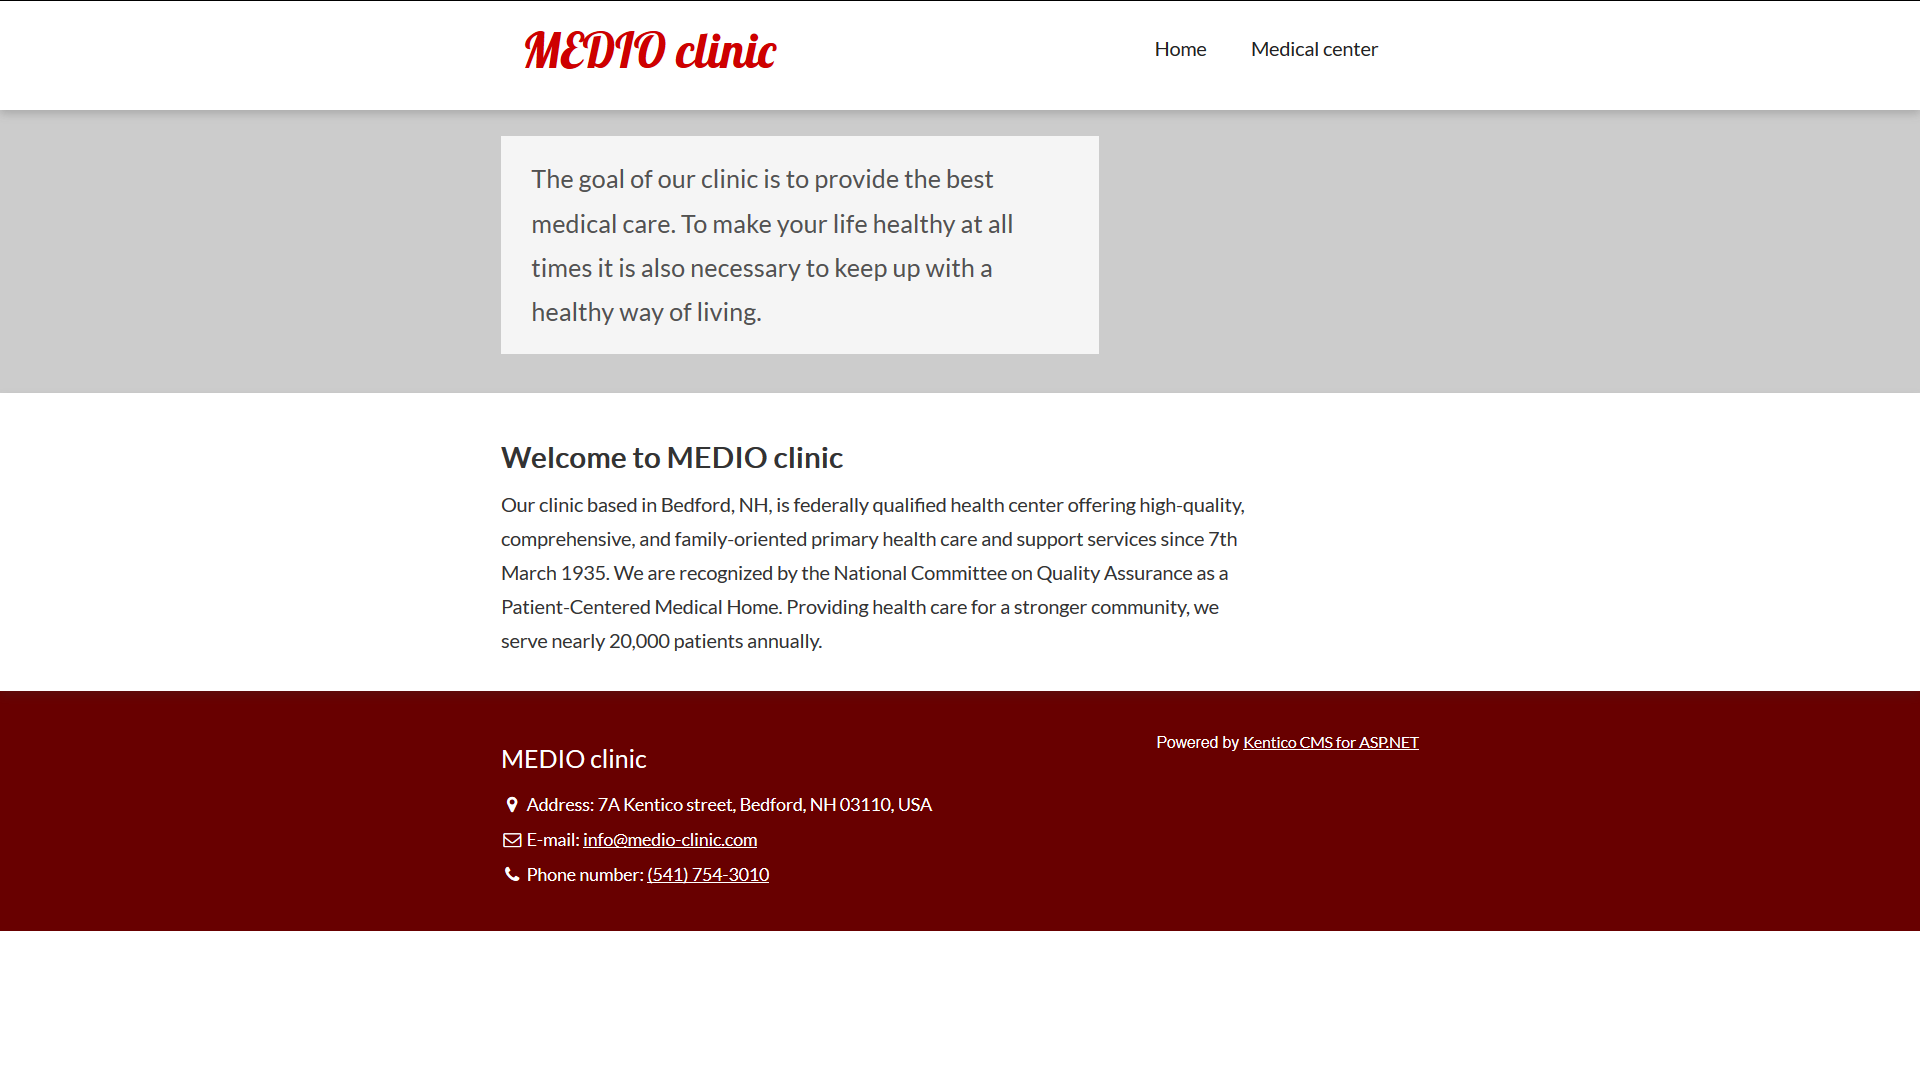 The Medio Clinic’s Home page on the live site